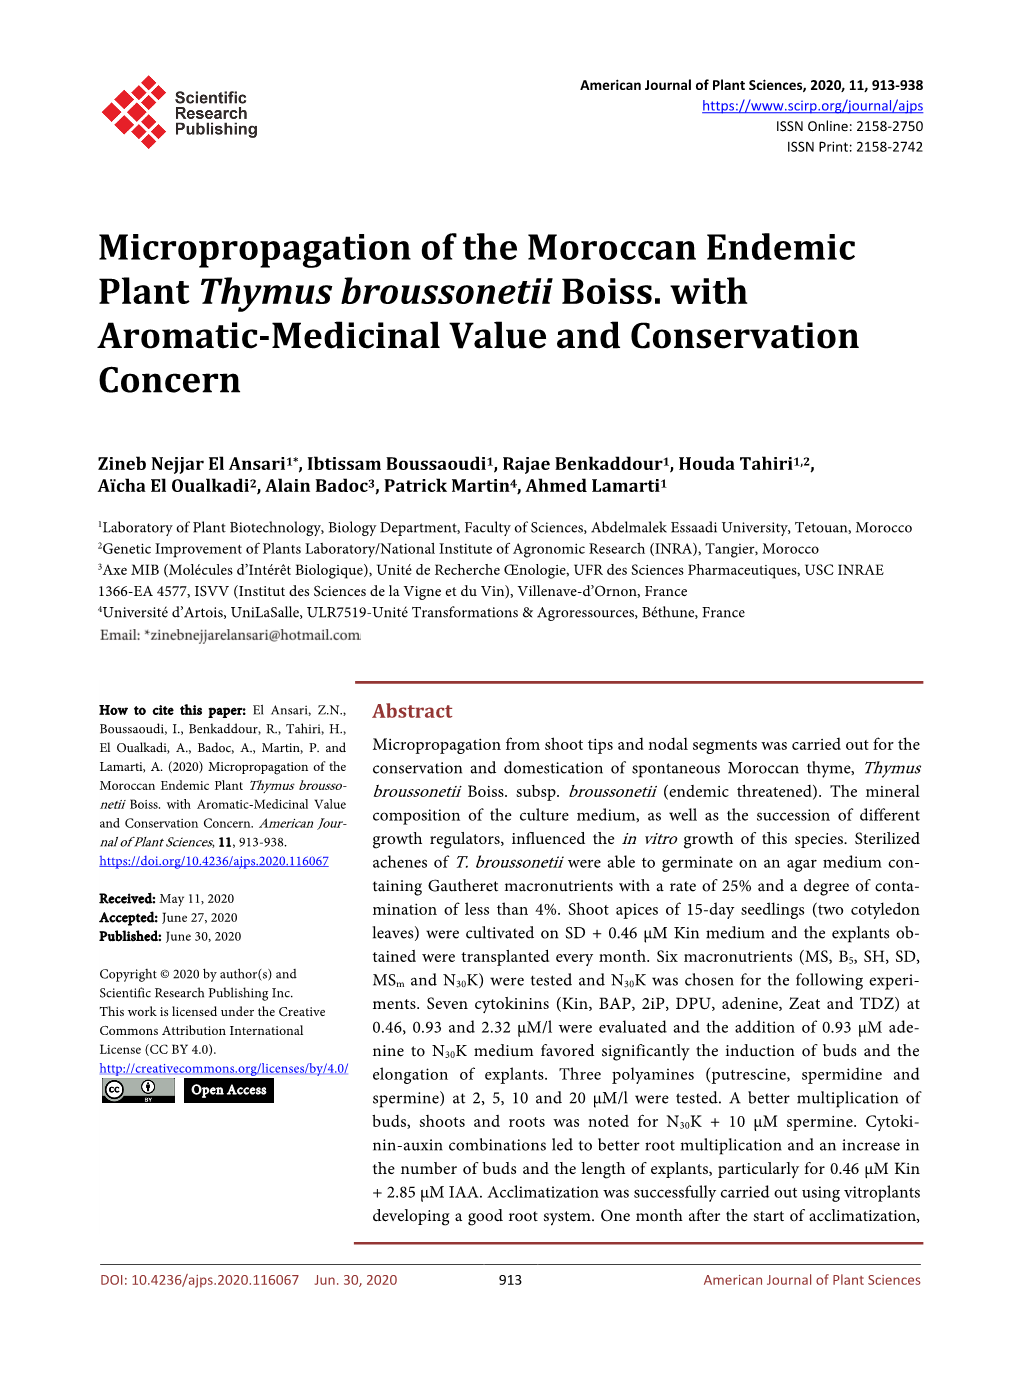 Micropropagation of the Moroccan Endemic Plant Thymus Broussonetii Boiss